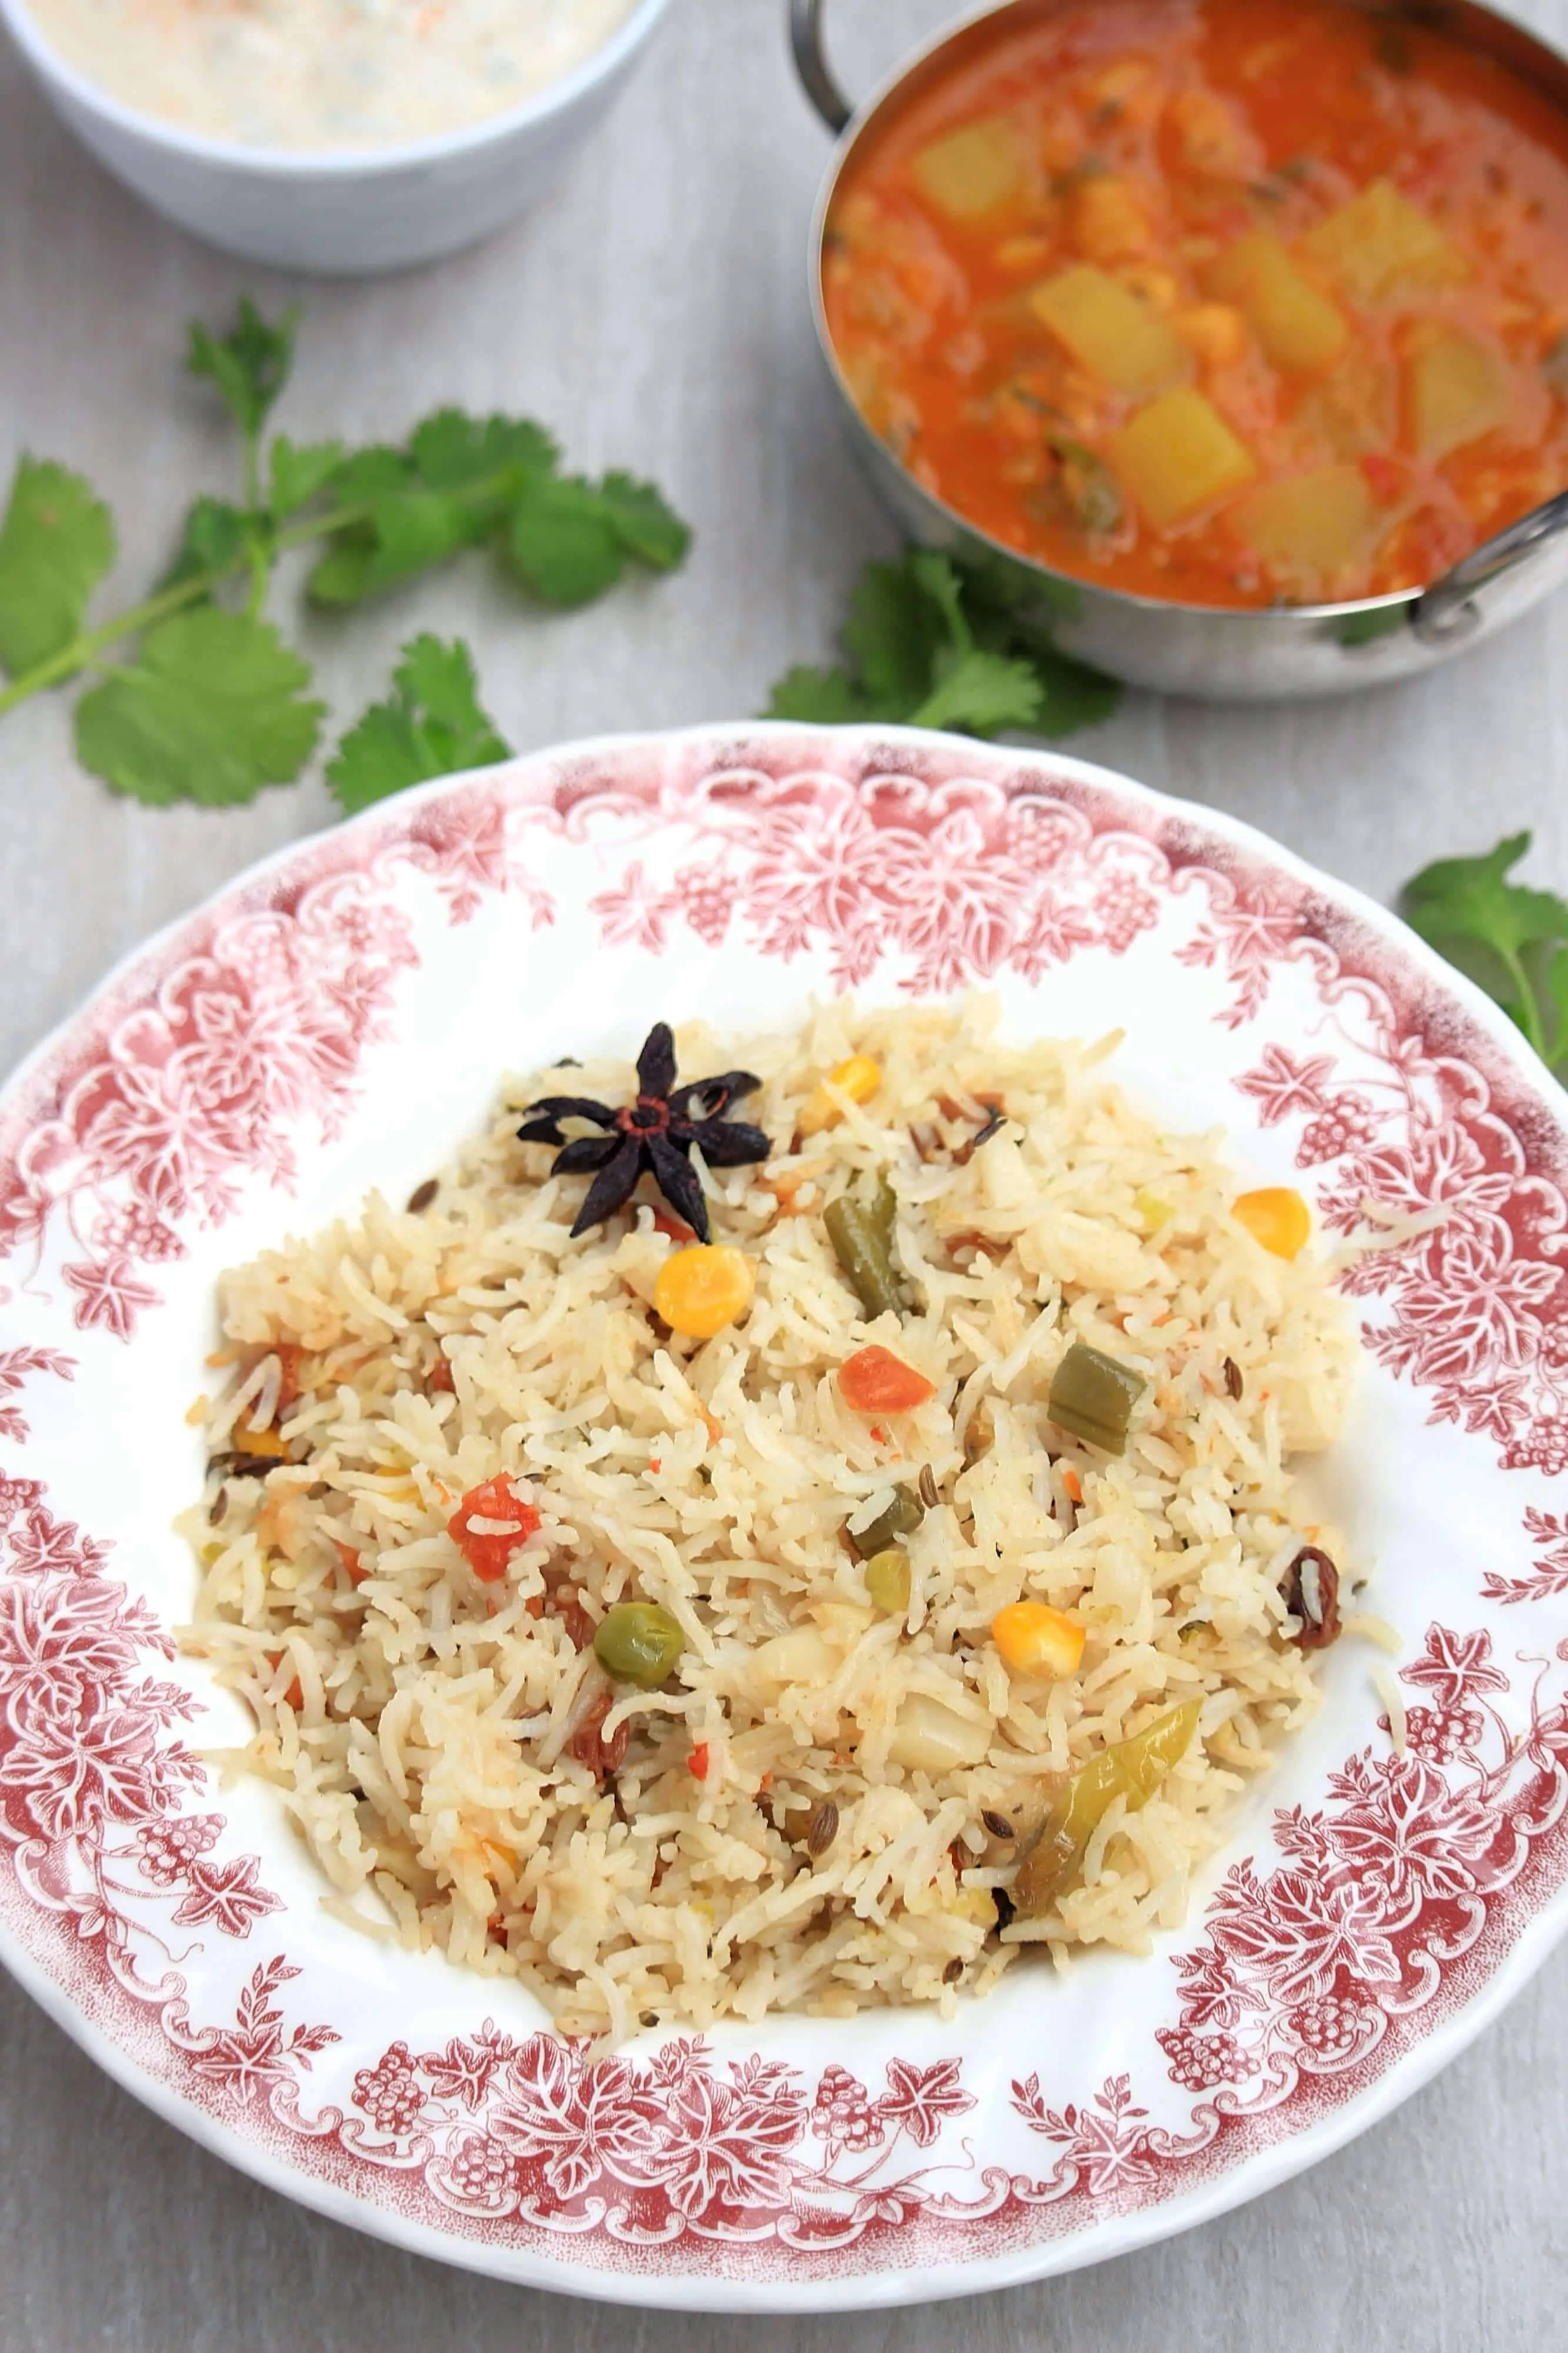 Vegetable Pulao is ready to serve.